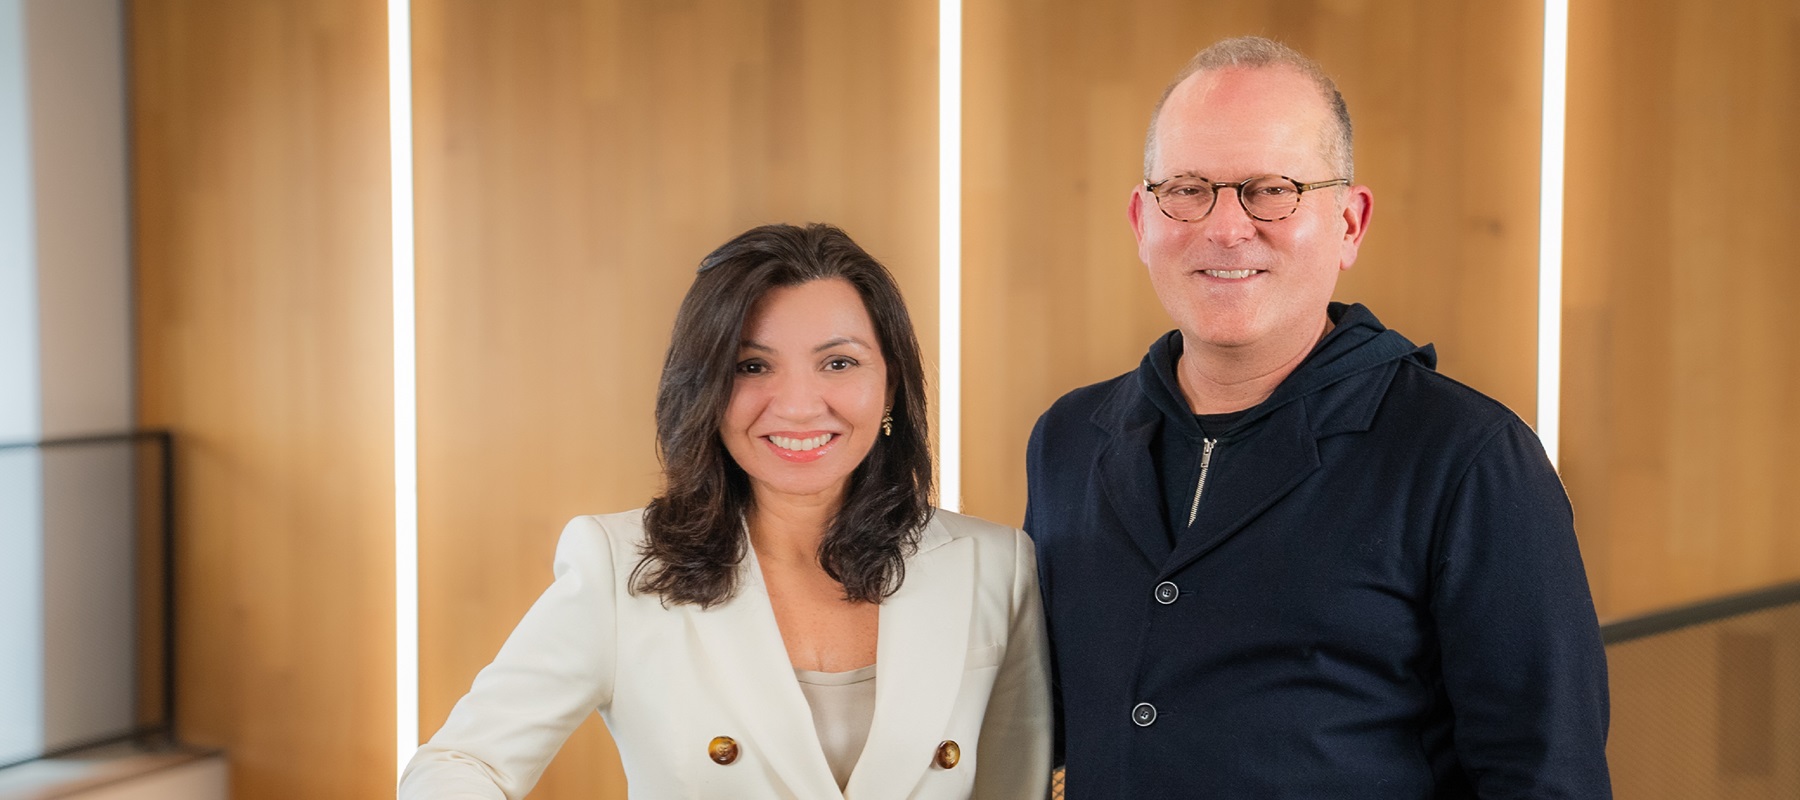 WPP merges communications agencies Hill & Knowlton and BCW to form Burson